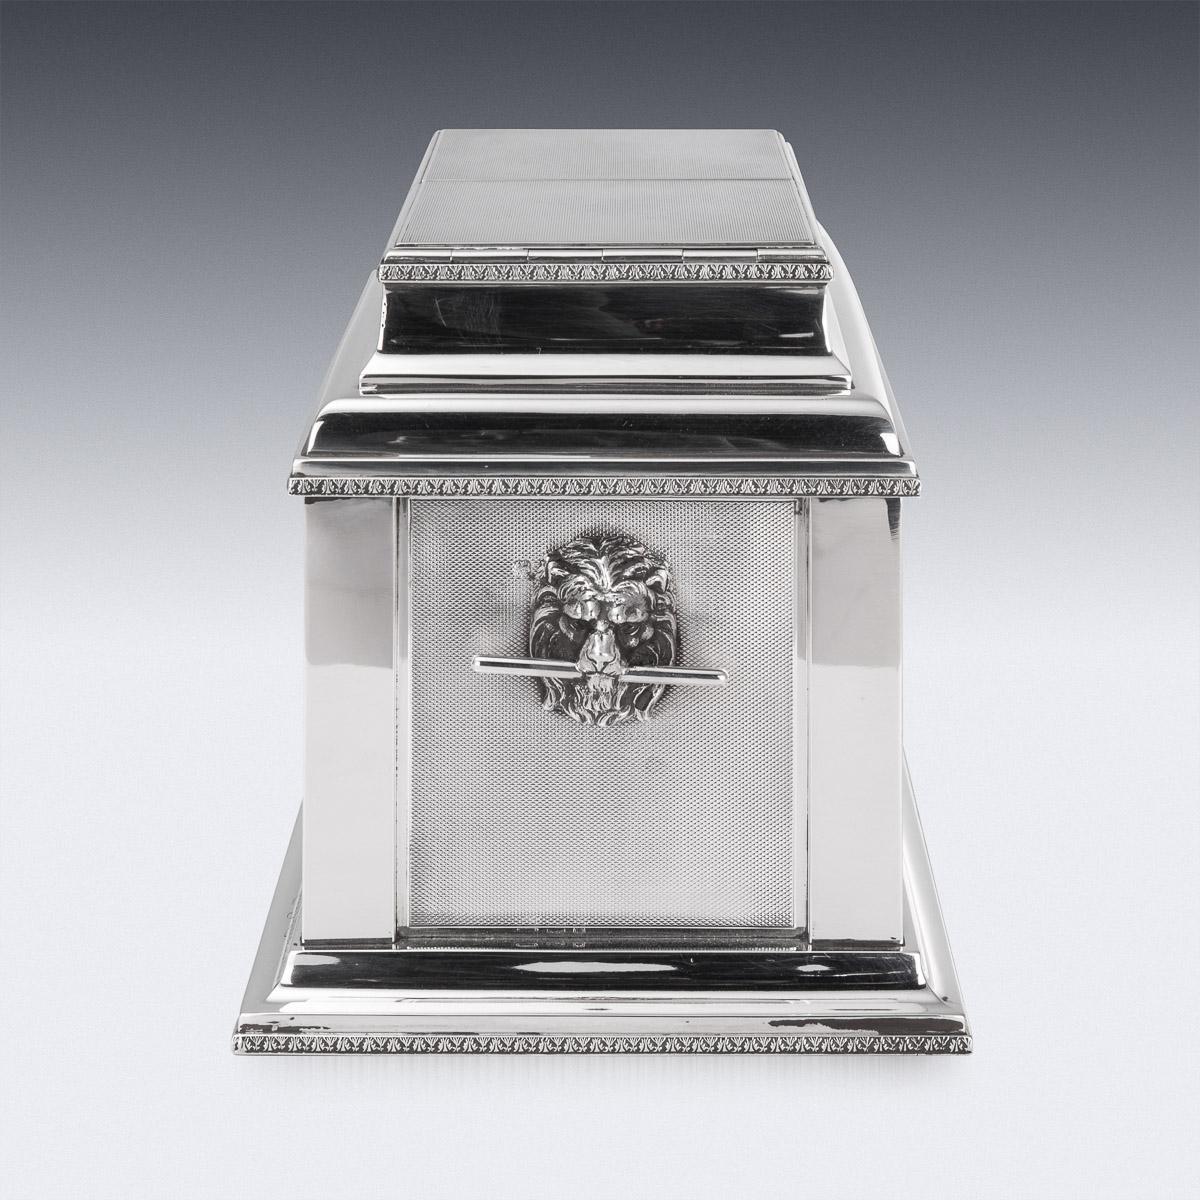 British 20th Century French Air Force Solid Silver Cigar & Cigarette Humidor Box, c.1927